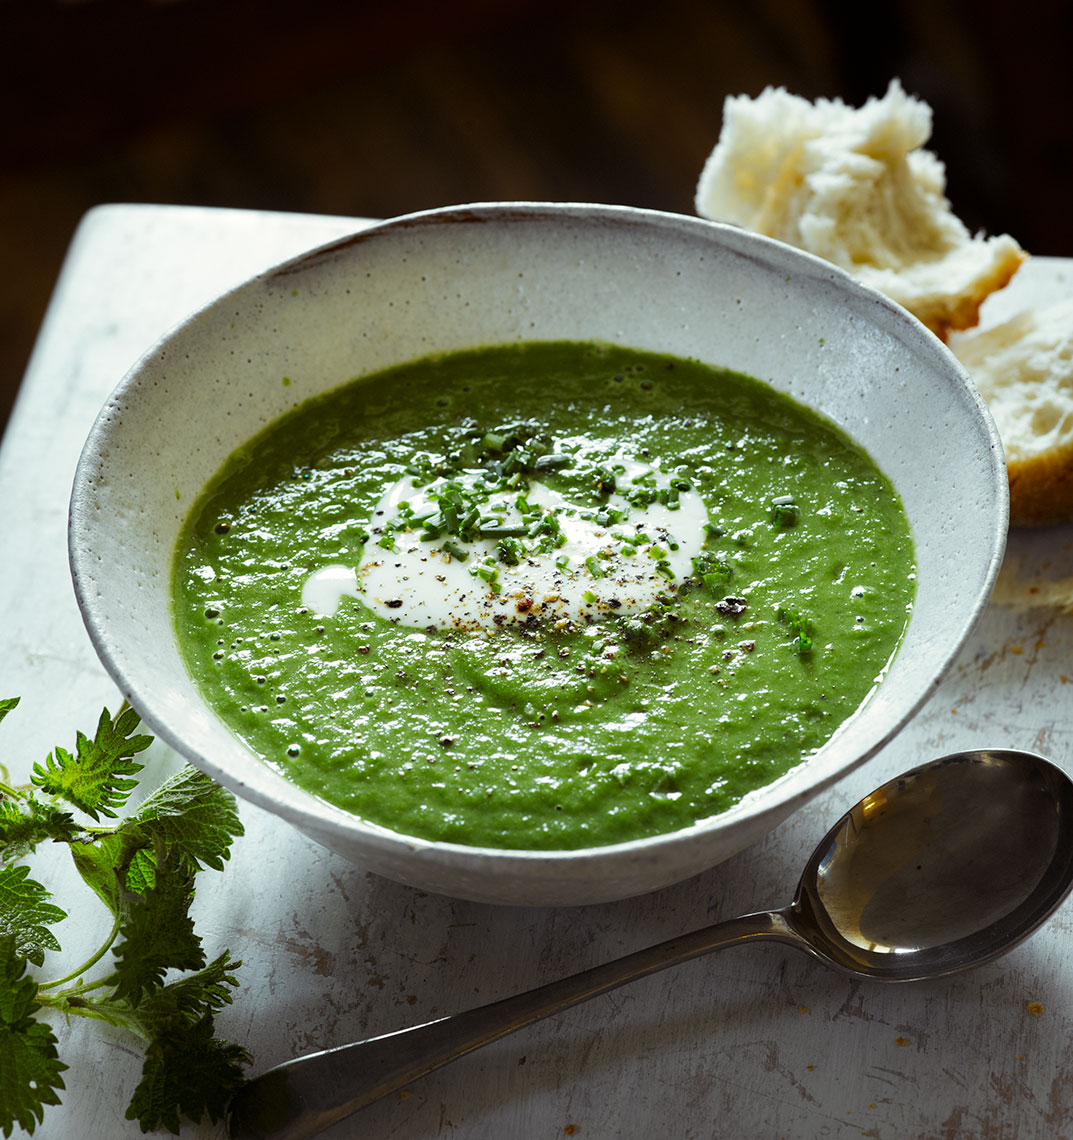 River Cottage Nettle soup | Colin Campbell - Food Photographer